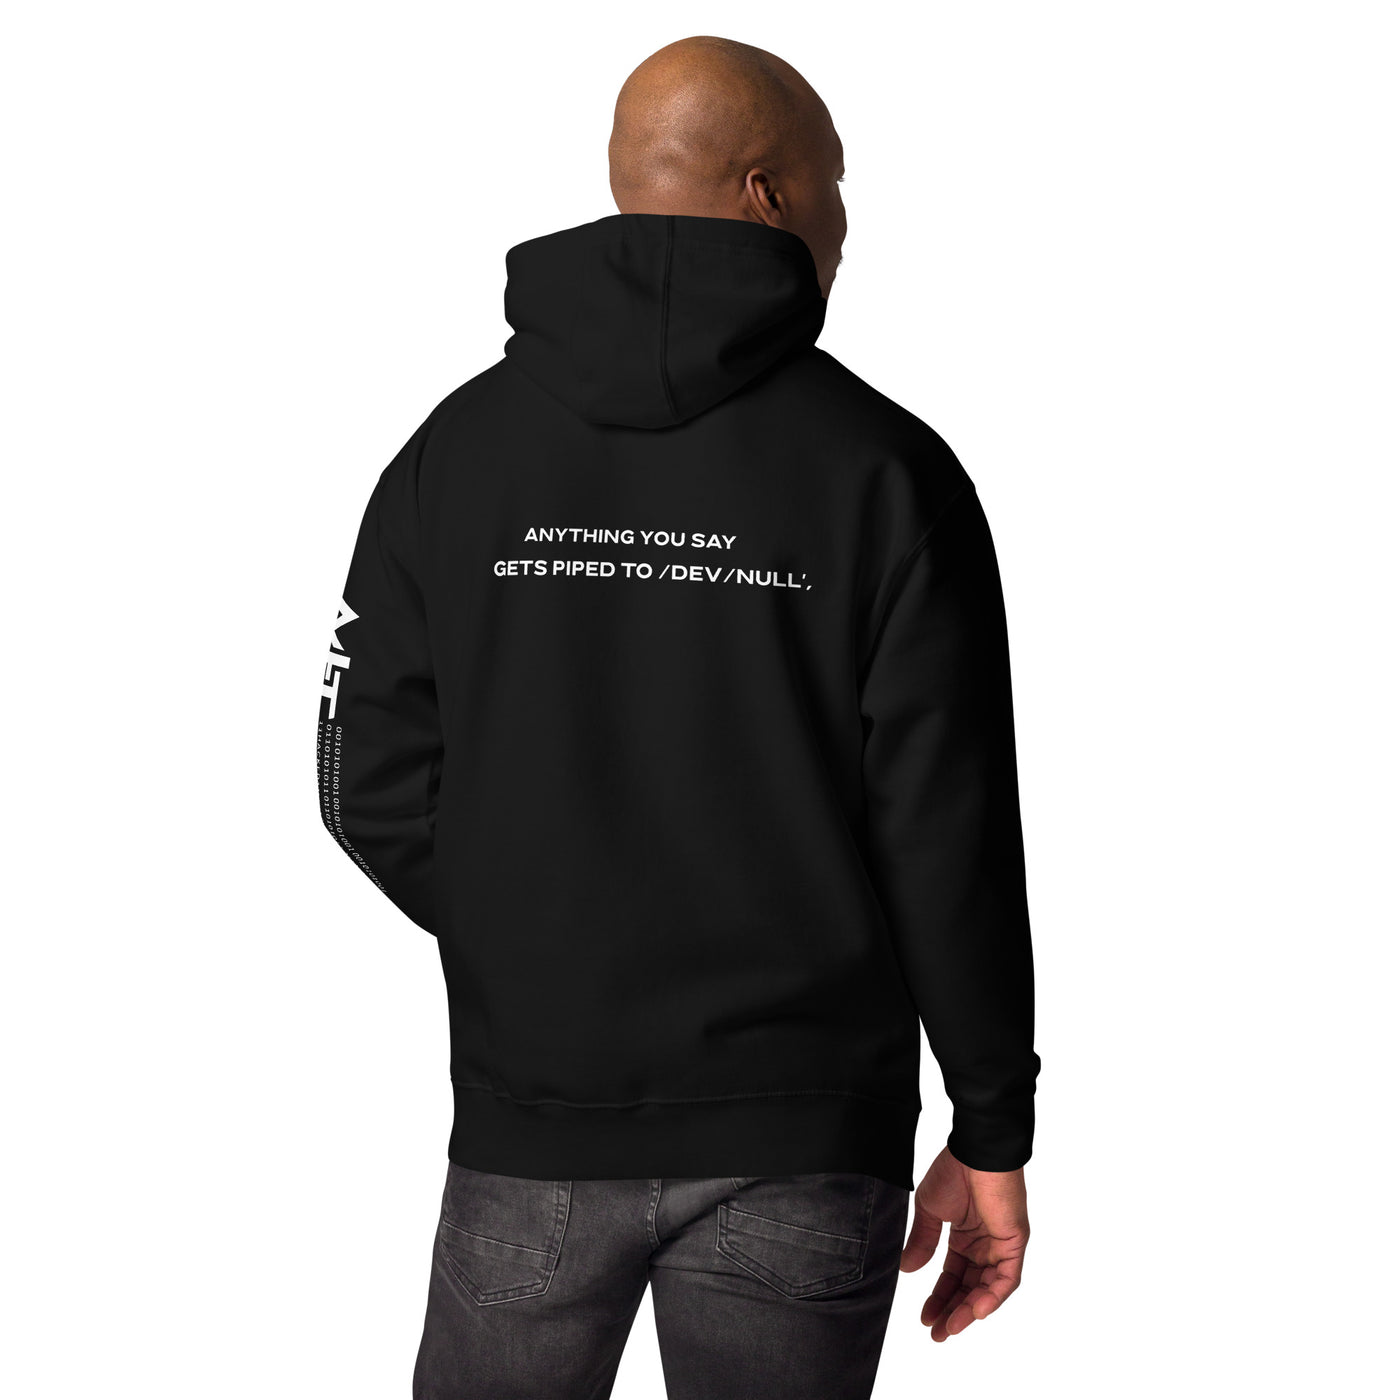 Anything you say Gets piped to devnull V2 - Unisex Hoodie ( Back Print )